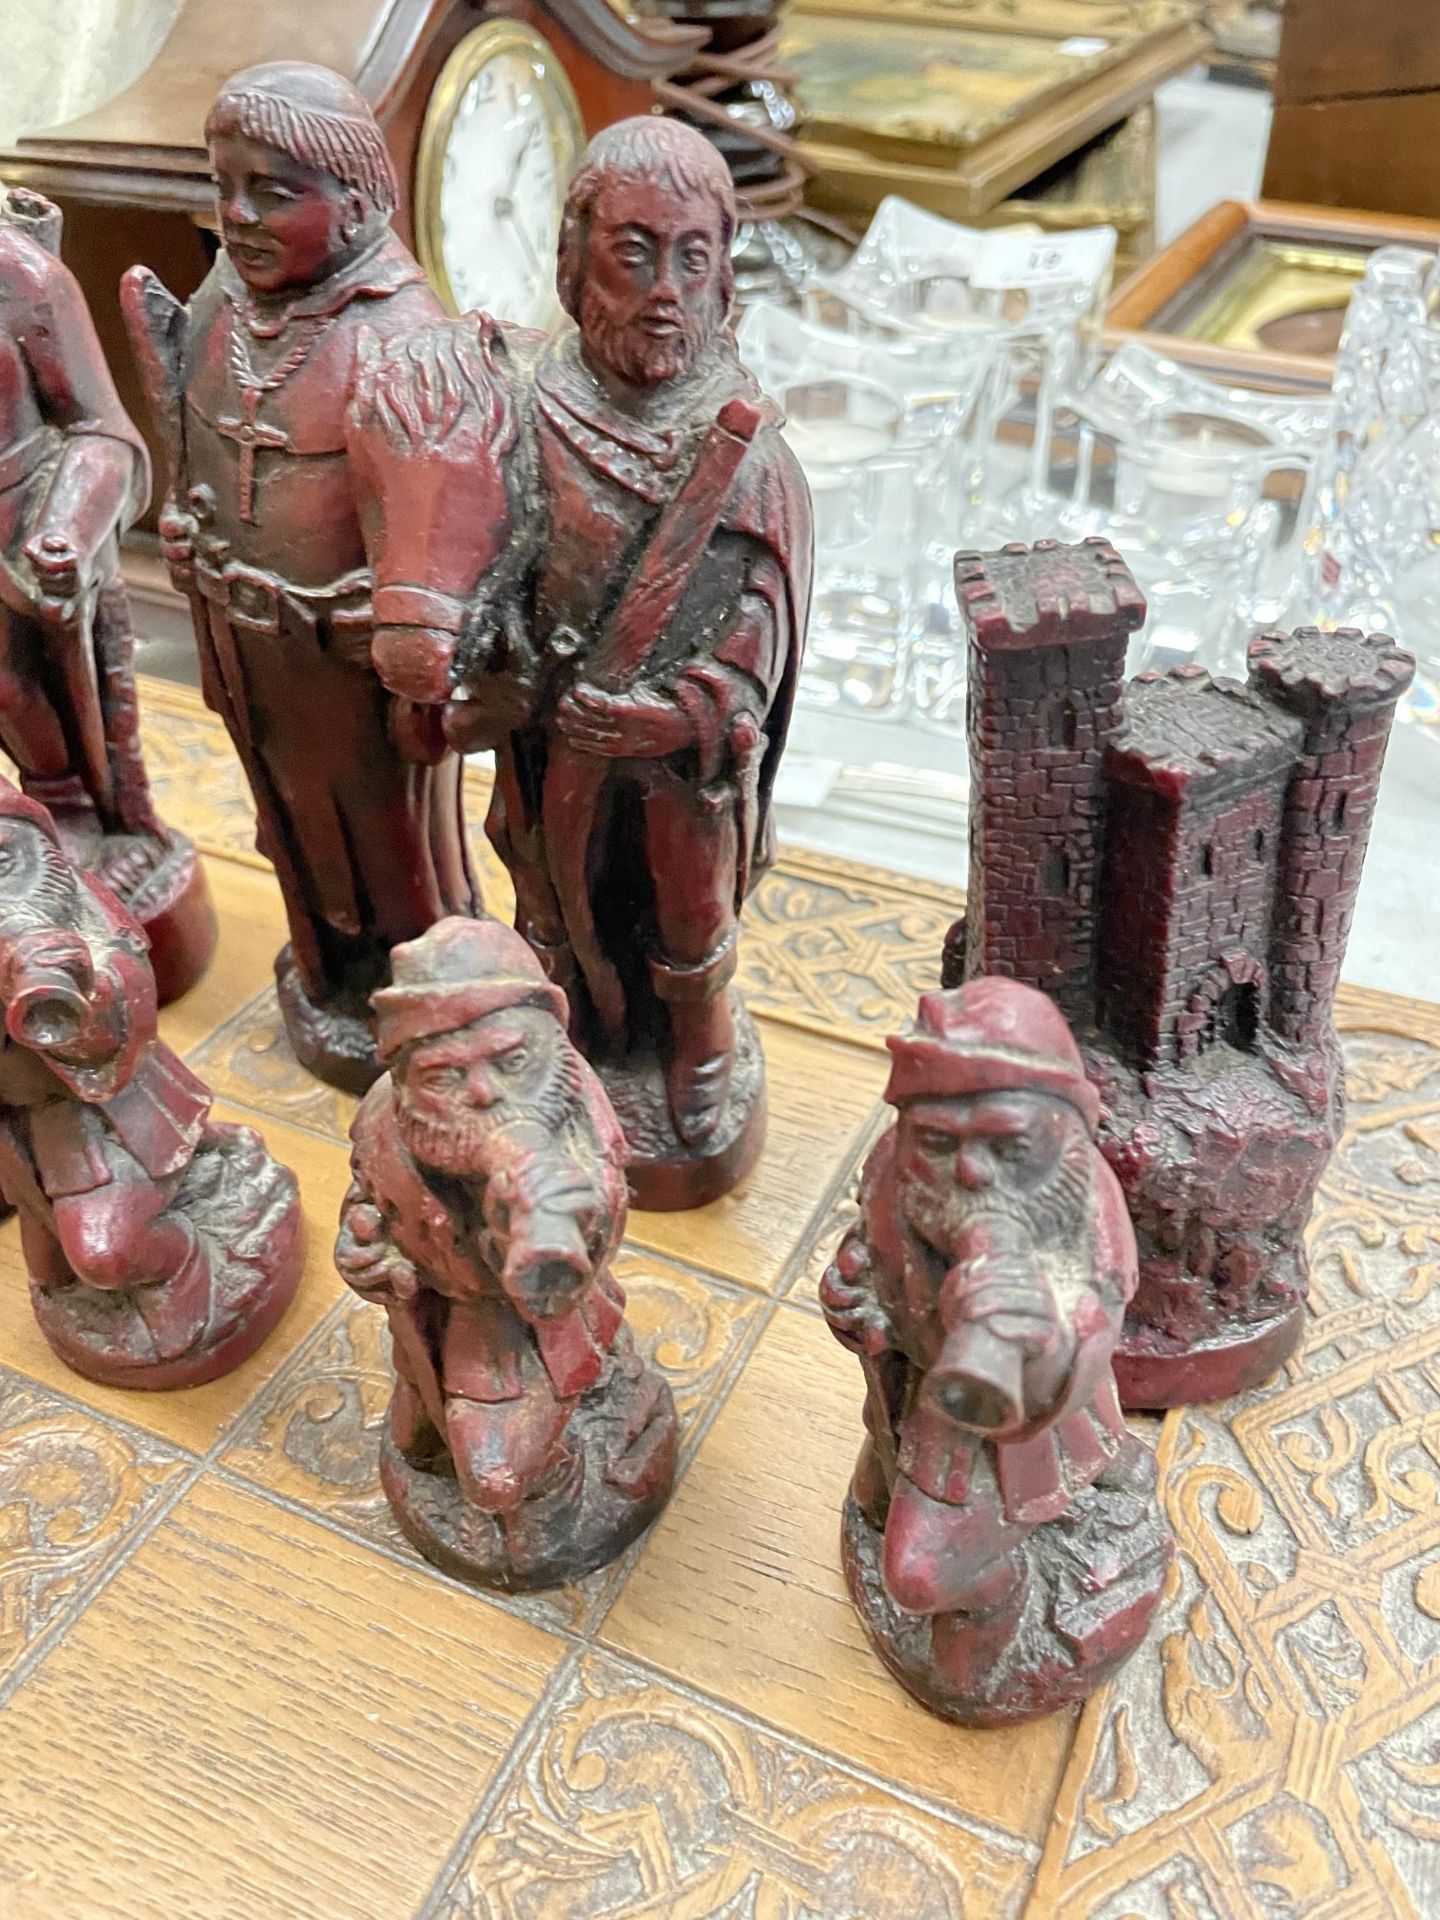 A VERY LARGE AND COMPLETE ROBIN HOOD RESIN CHESS SET WITH PIECES UP TO AND OVER 15CM TALL, - Image 7 of 7